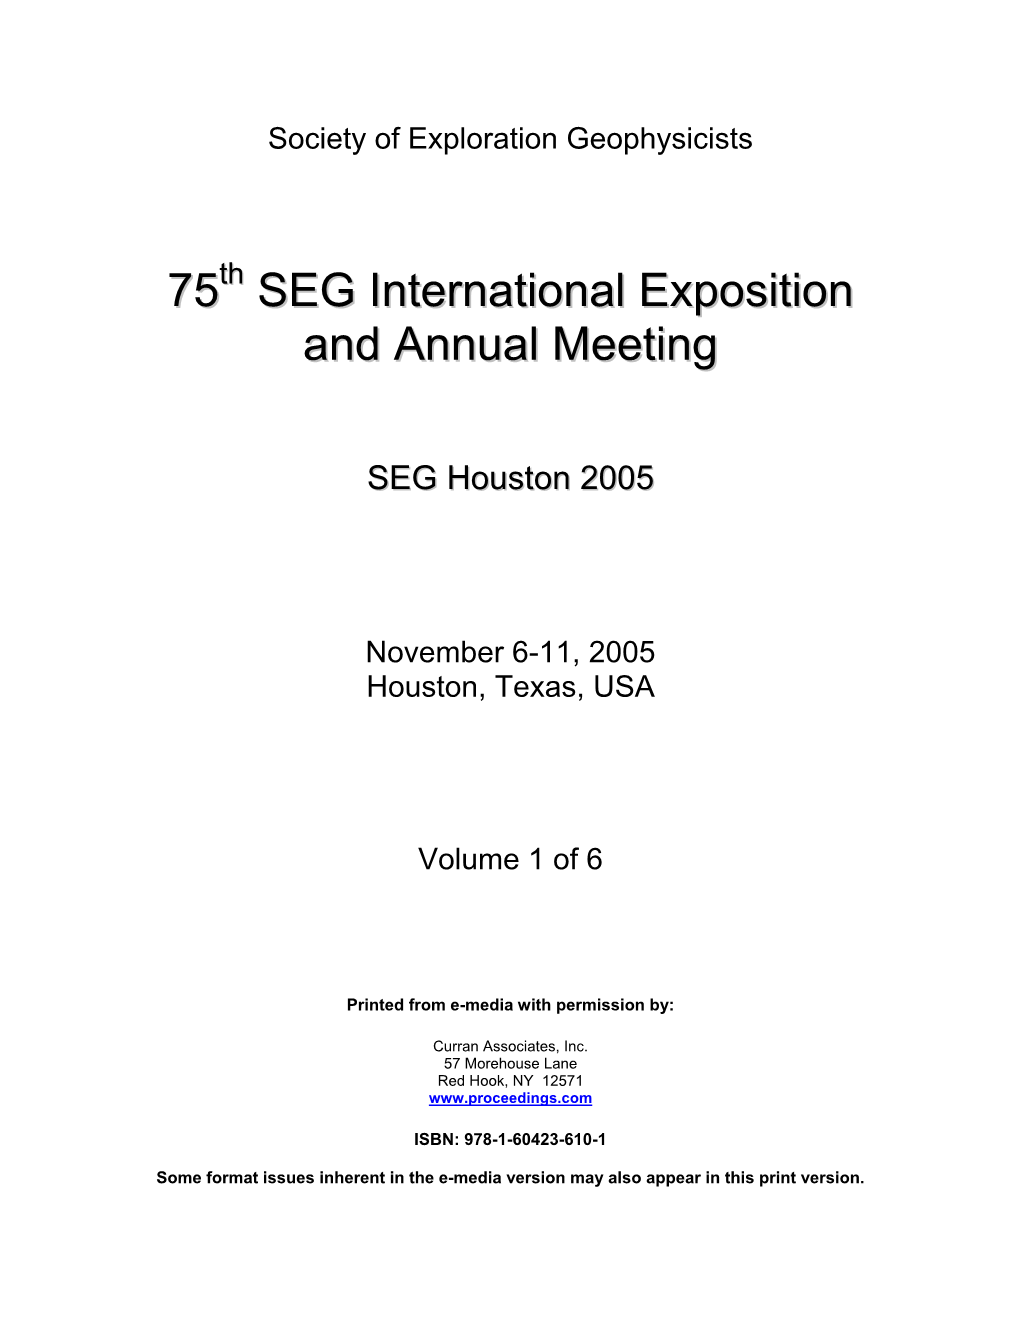 SEG International Exposition and Annual Meeting